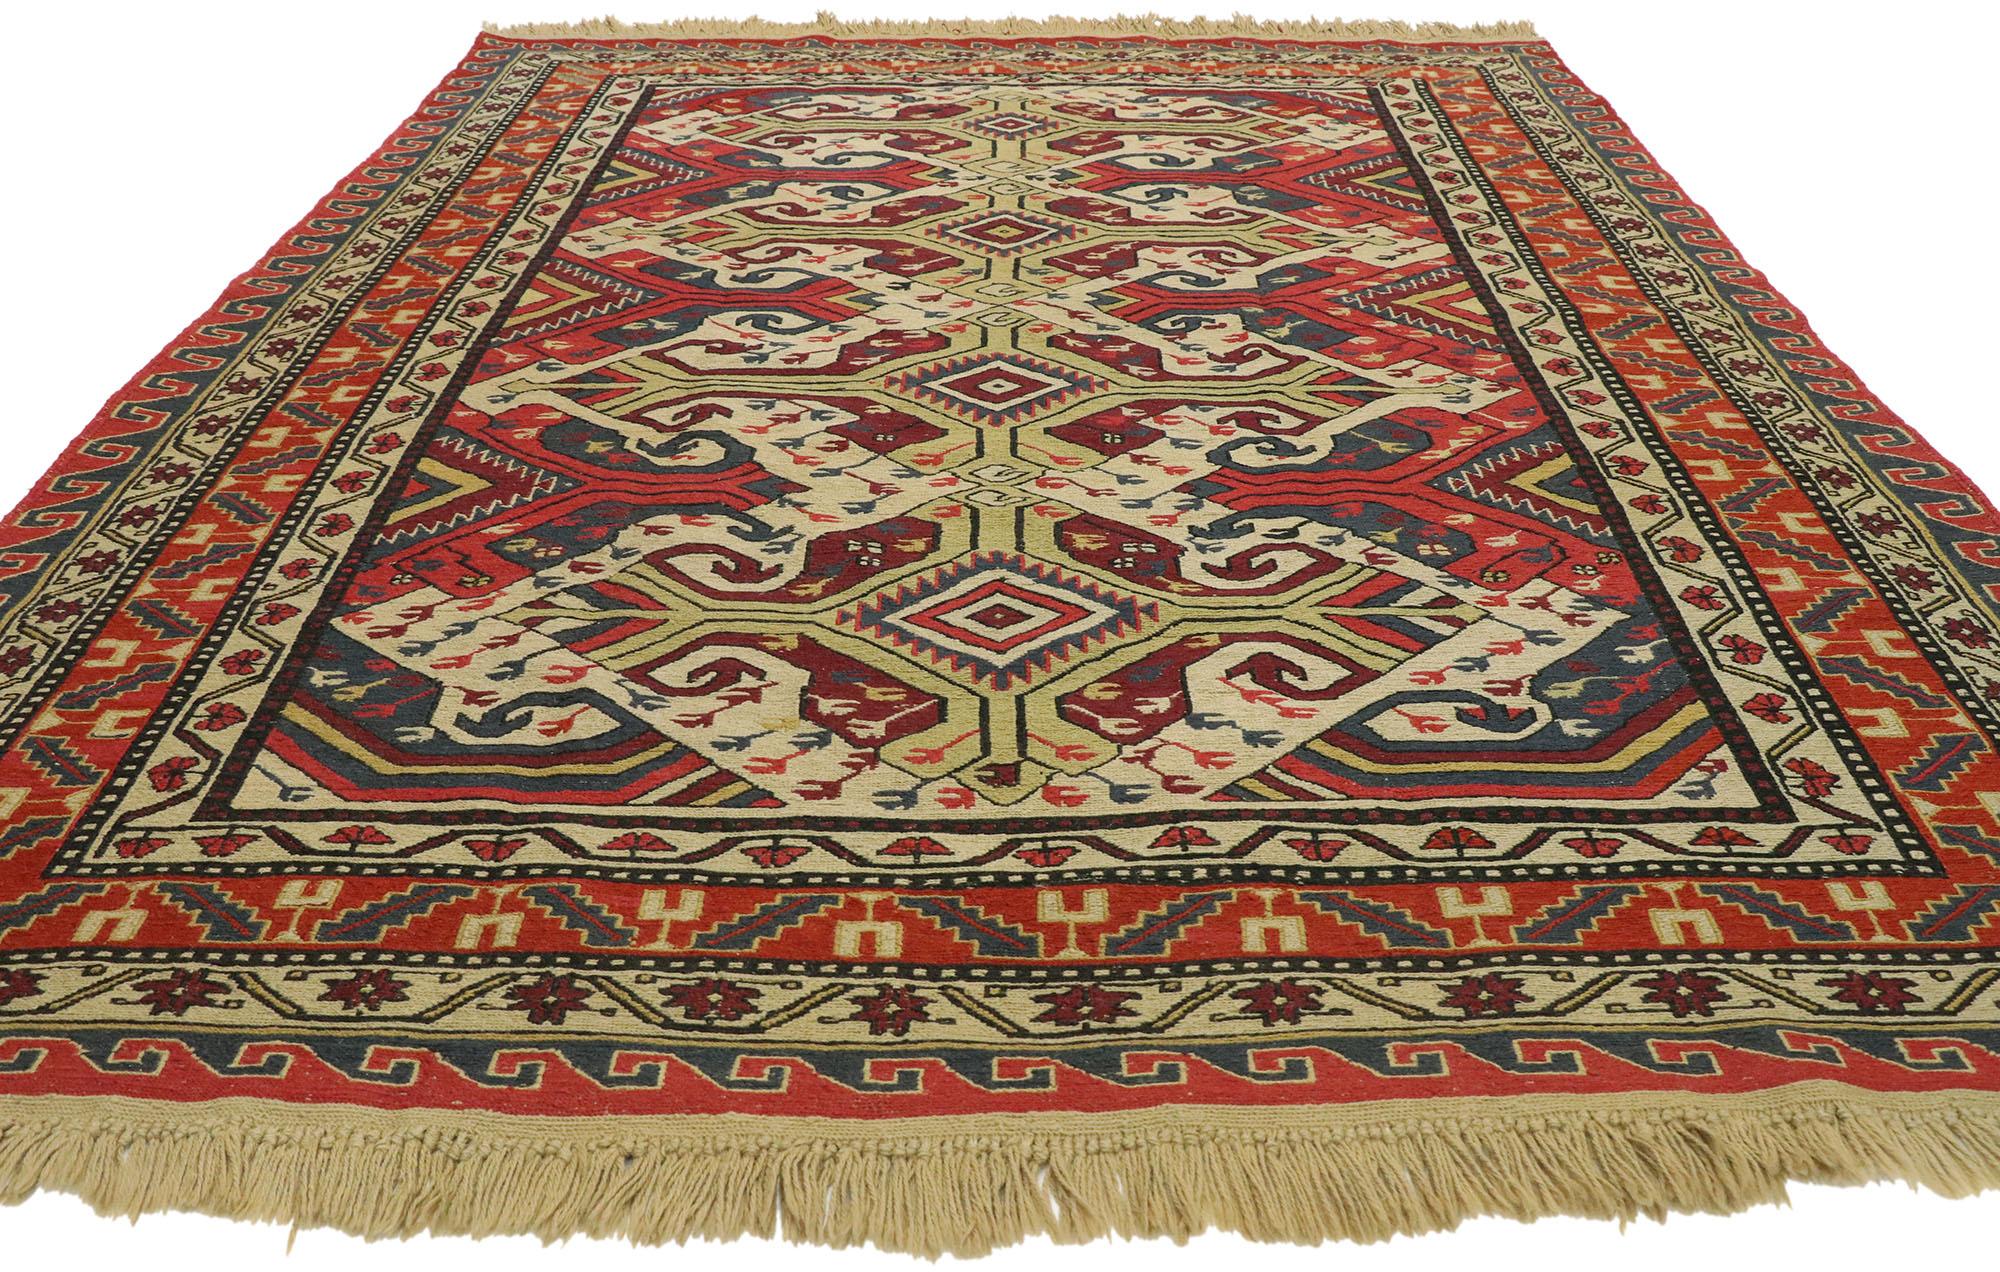 Tribal Antique Caucasian Soumak Rug with Rustic Arts & Crafts Style